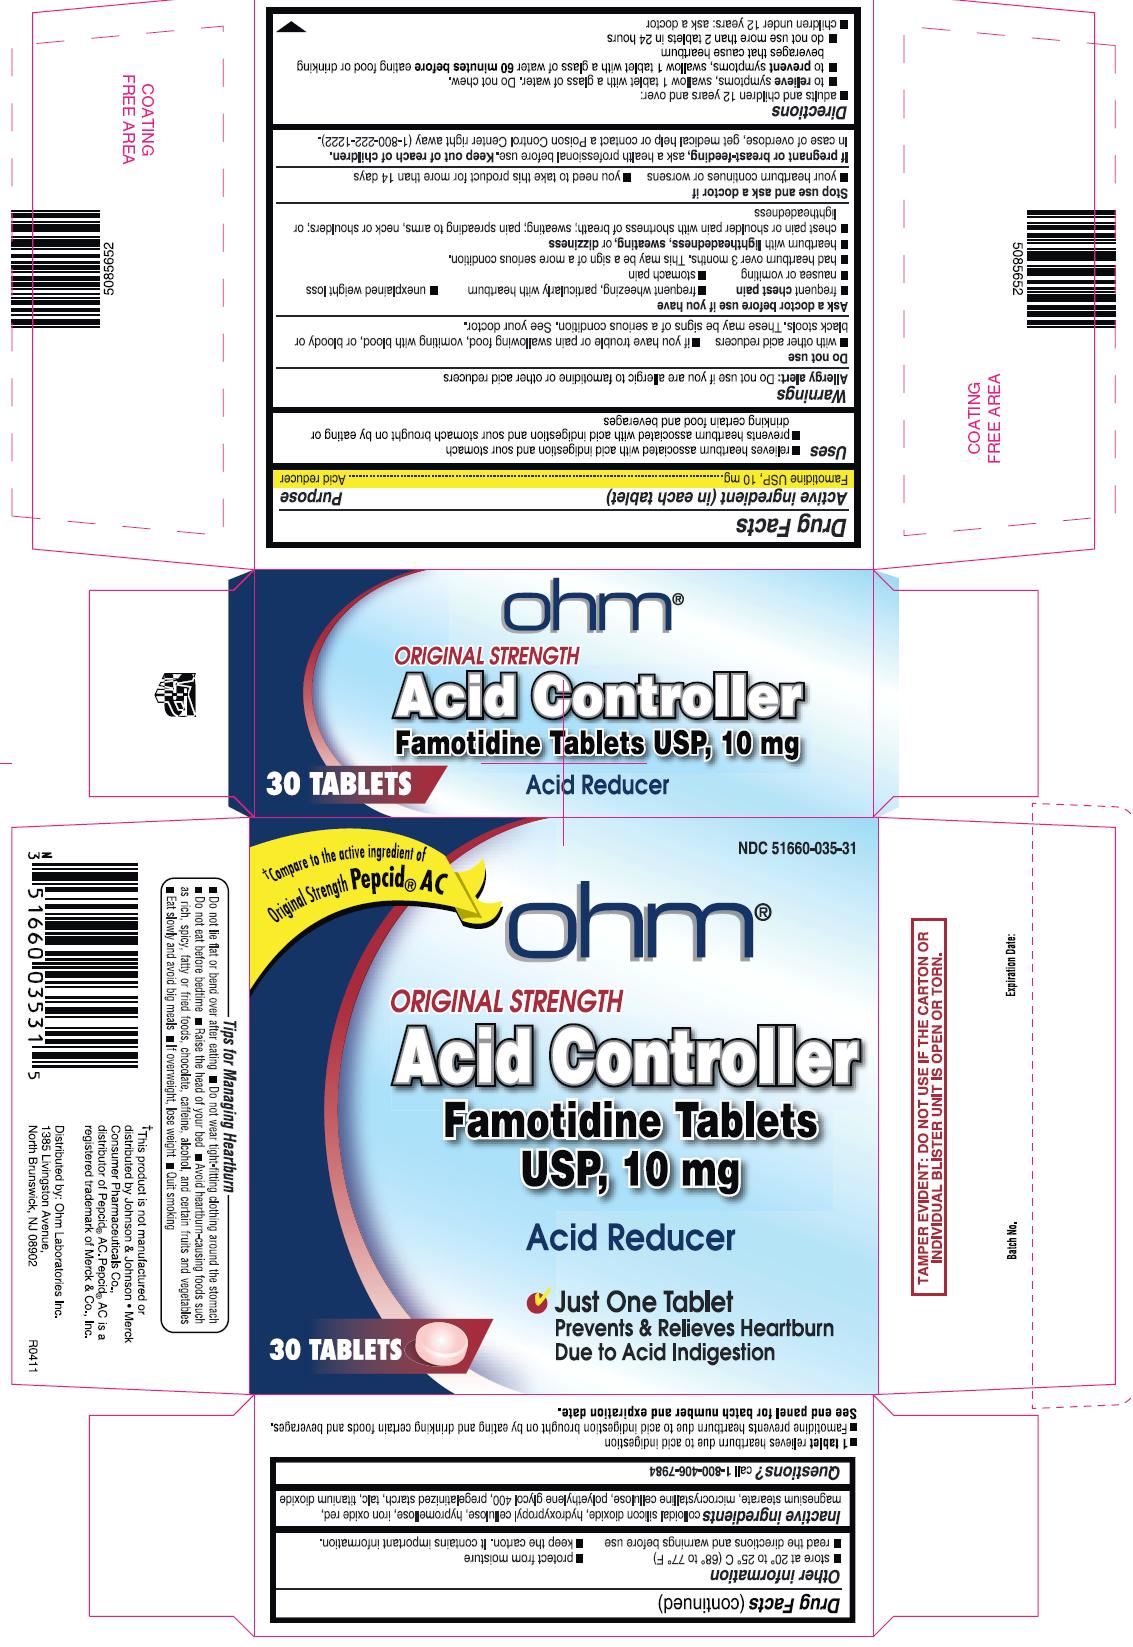 This is the 30 count bottle carton label for Famotidine tablets USP, 10 mg.